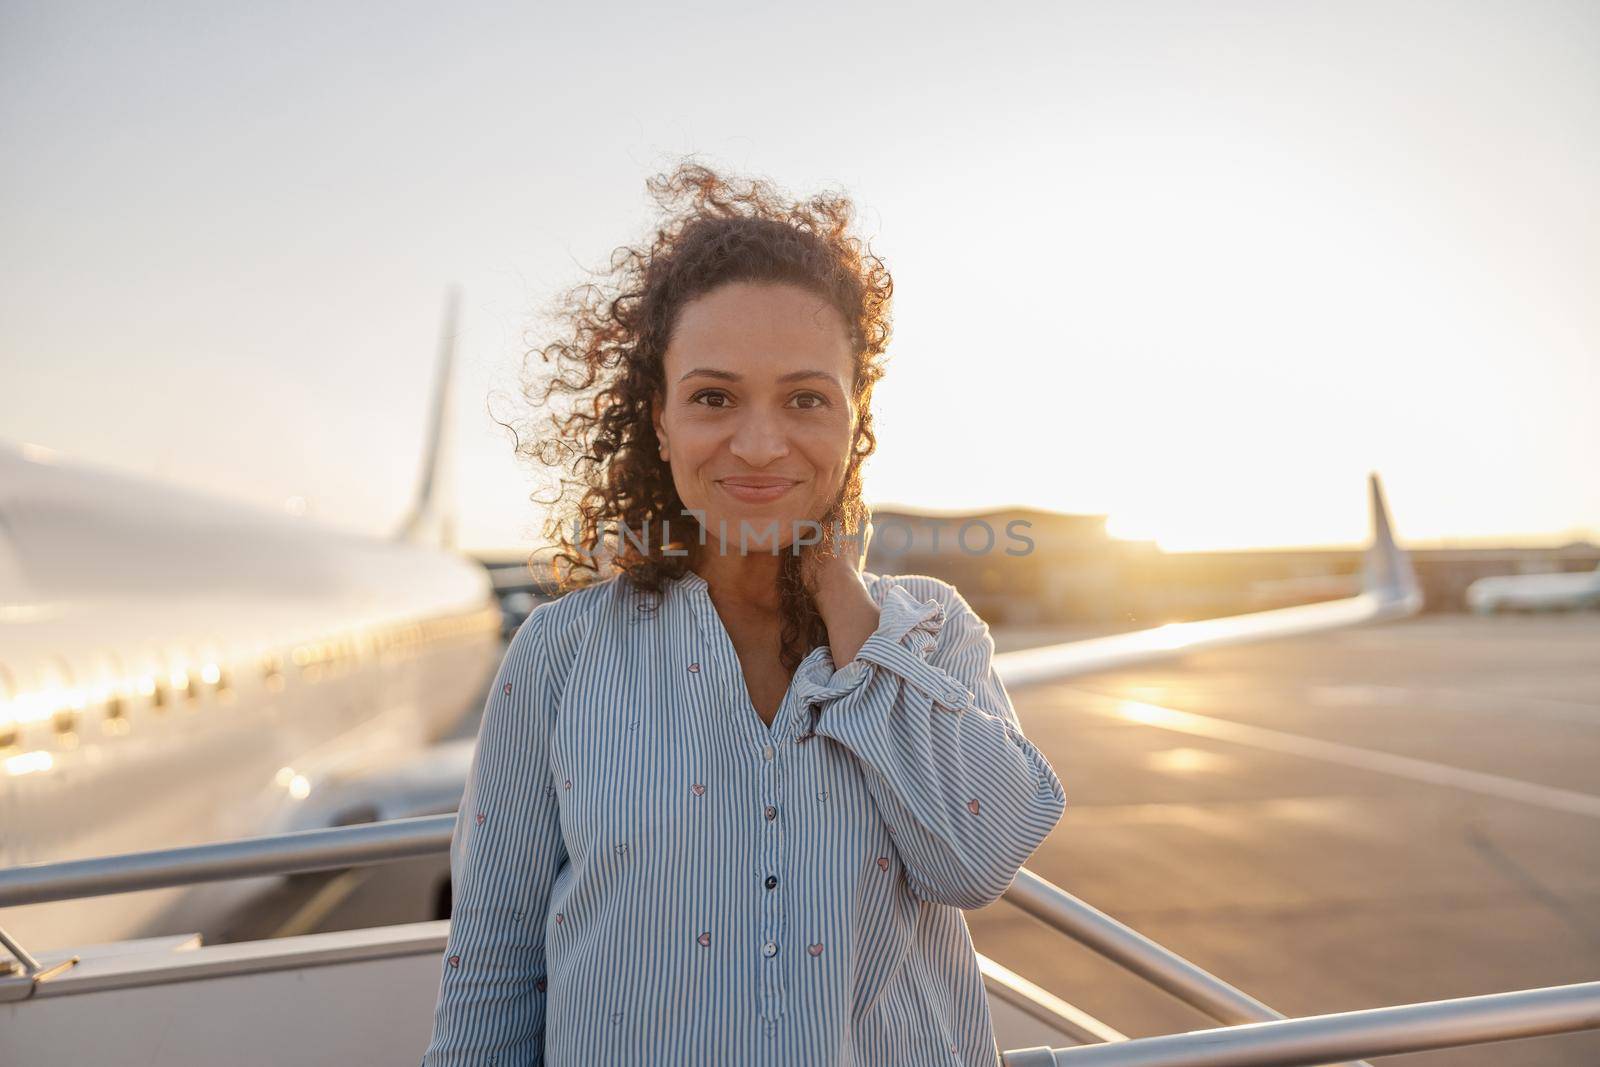 Portrait of relaxed woman smiling at camera while standing outdoors ready for boarding the plane at sunset by Yaroslav_astakhov